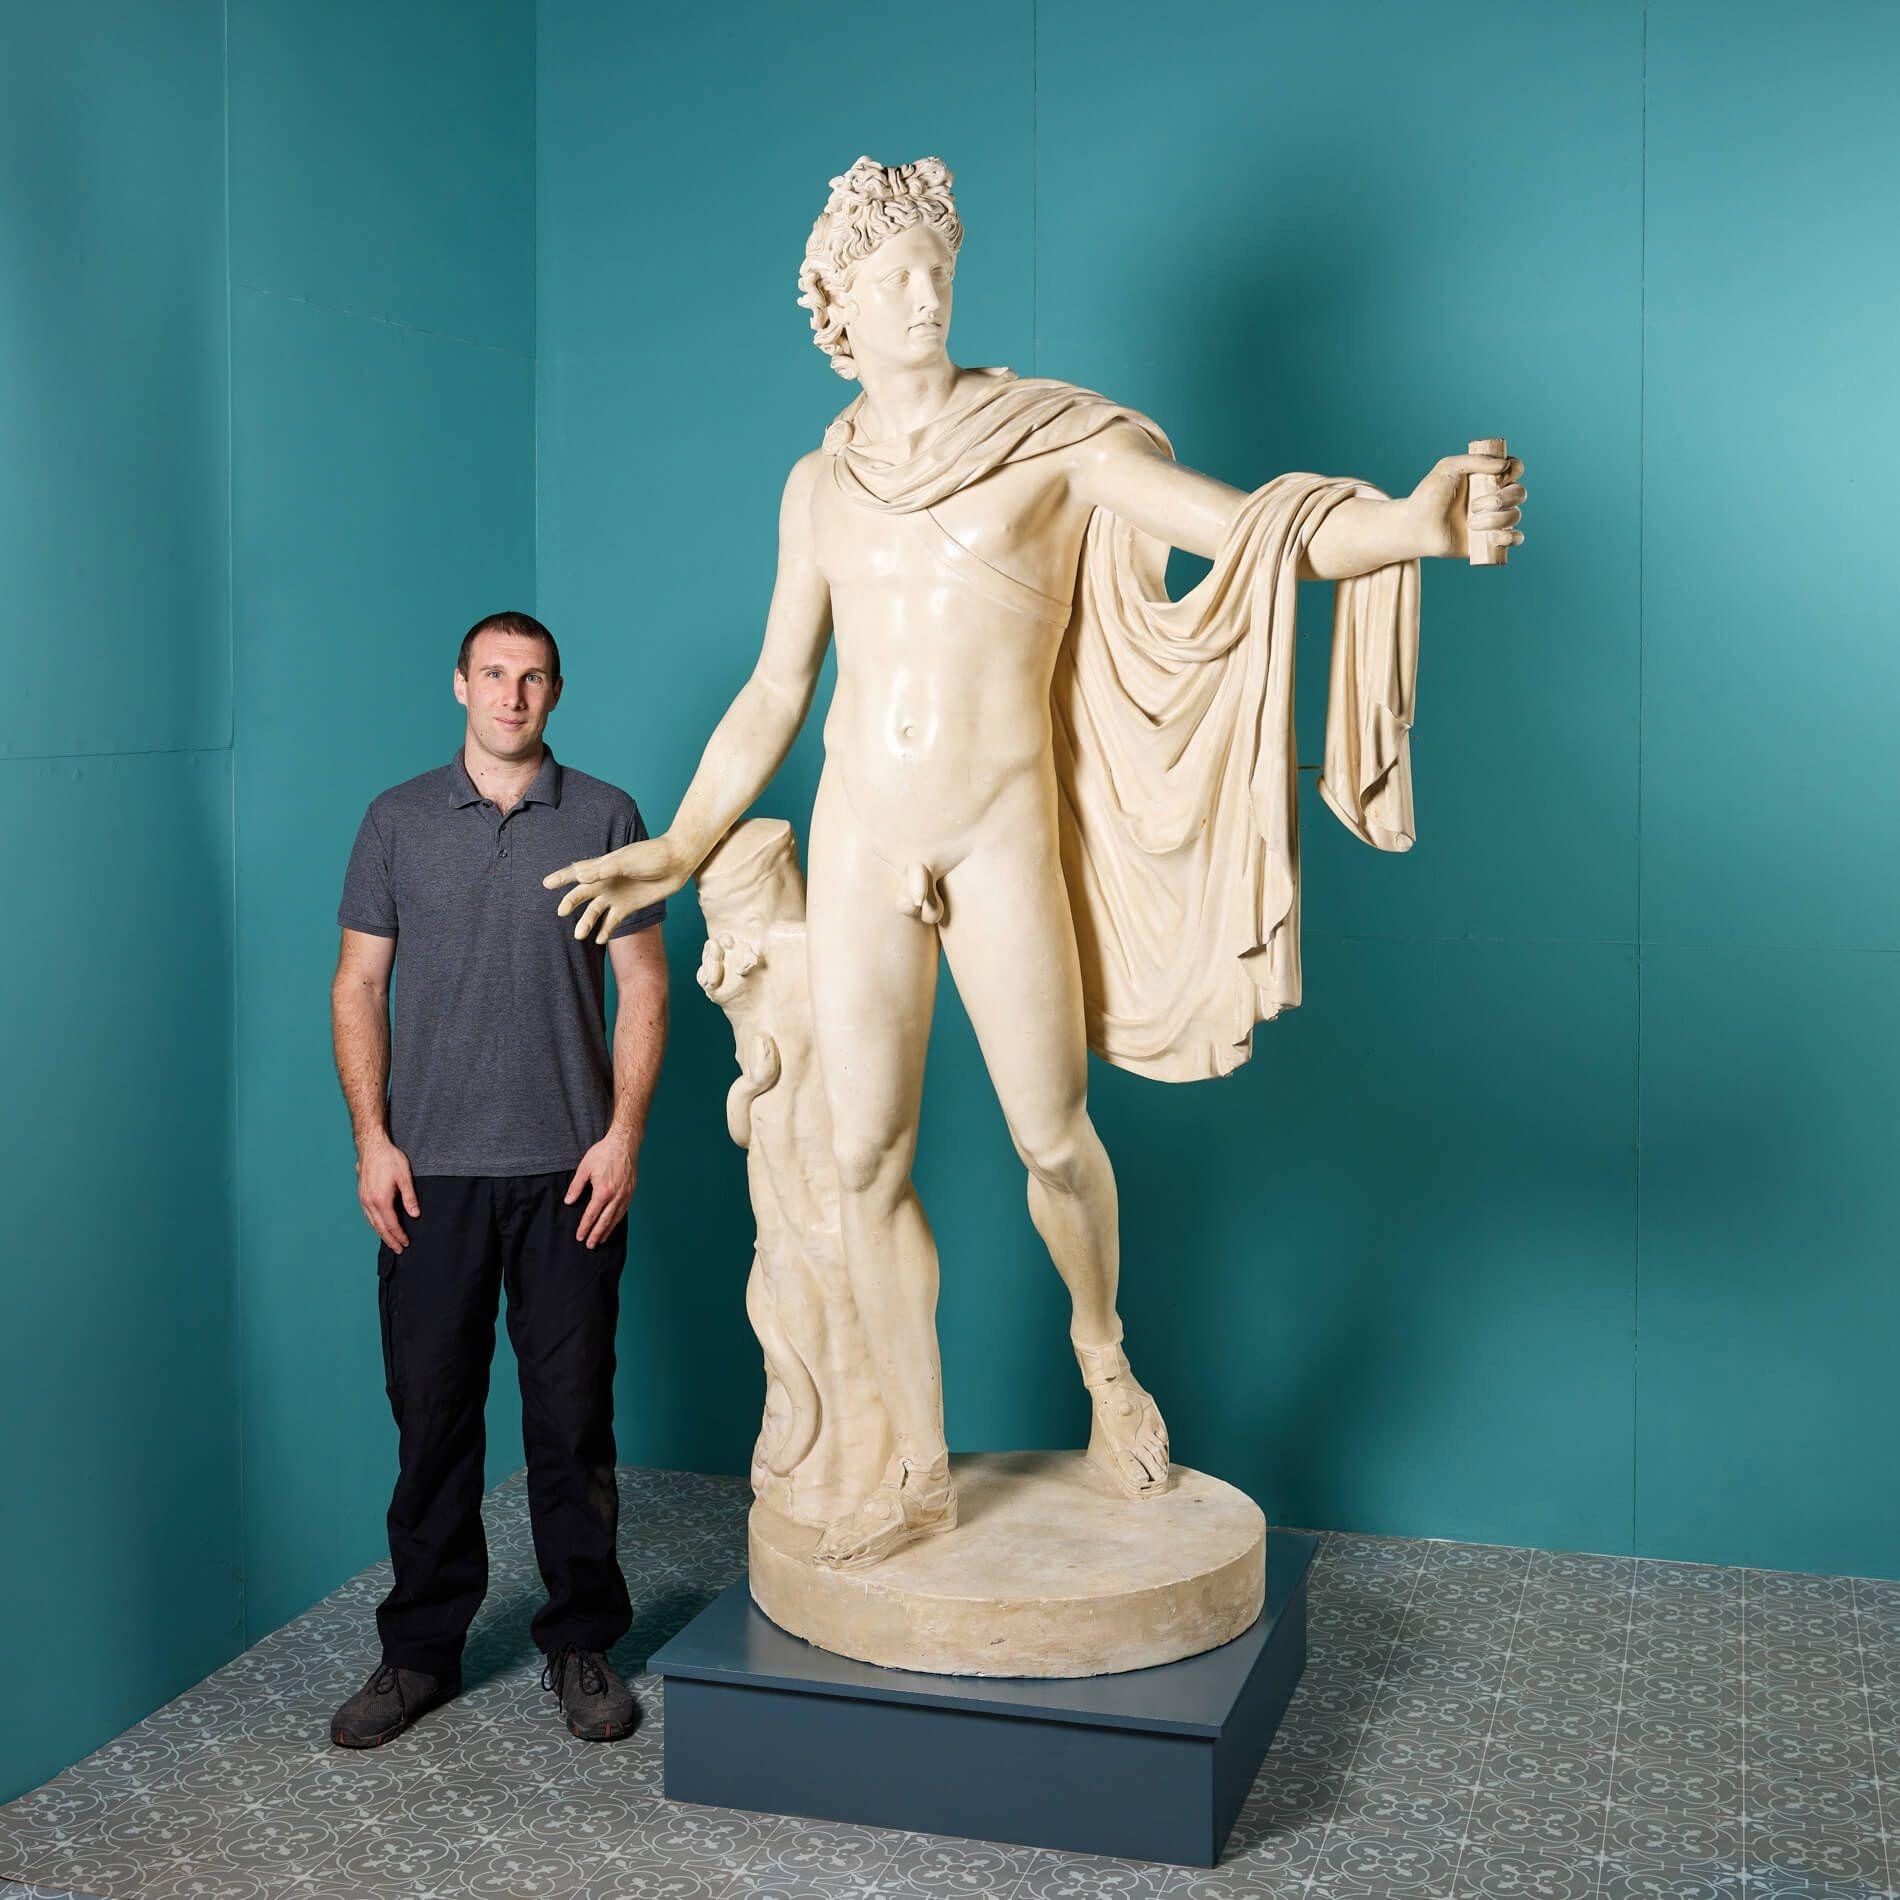 This impressive statue is a full-scale plaster cast of ‘The Apollo Belvedere’ made by the Louvre Museum workshops in the late 19th century. Detailed with a medallion to the base that reads ‘Musee Du Louvre’, the cast is taken from a reproduction of